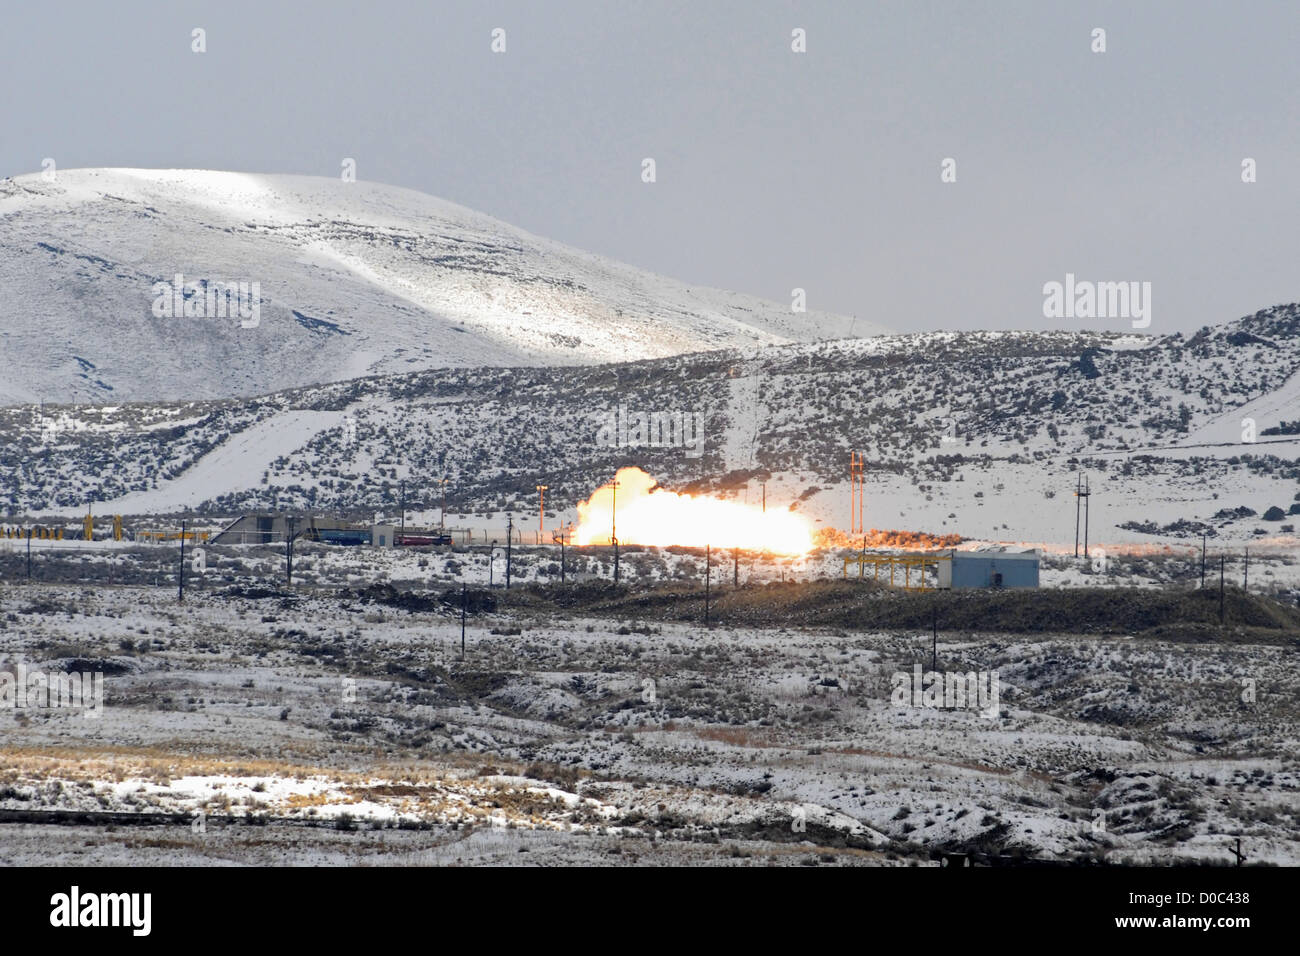 The final space shuttle solid rocket booster test is conducted ATK test site near Promontory Utah on foggy snow-covered morning Stock Photo